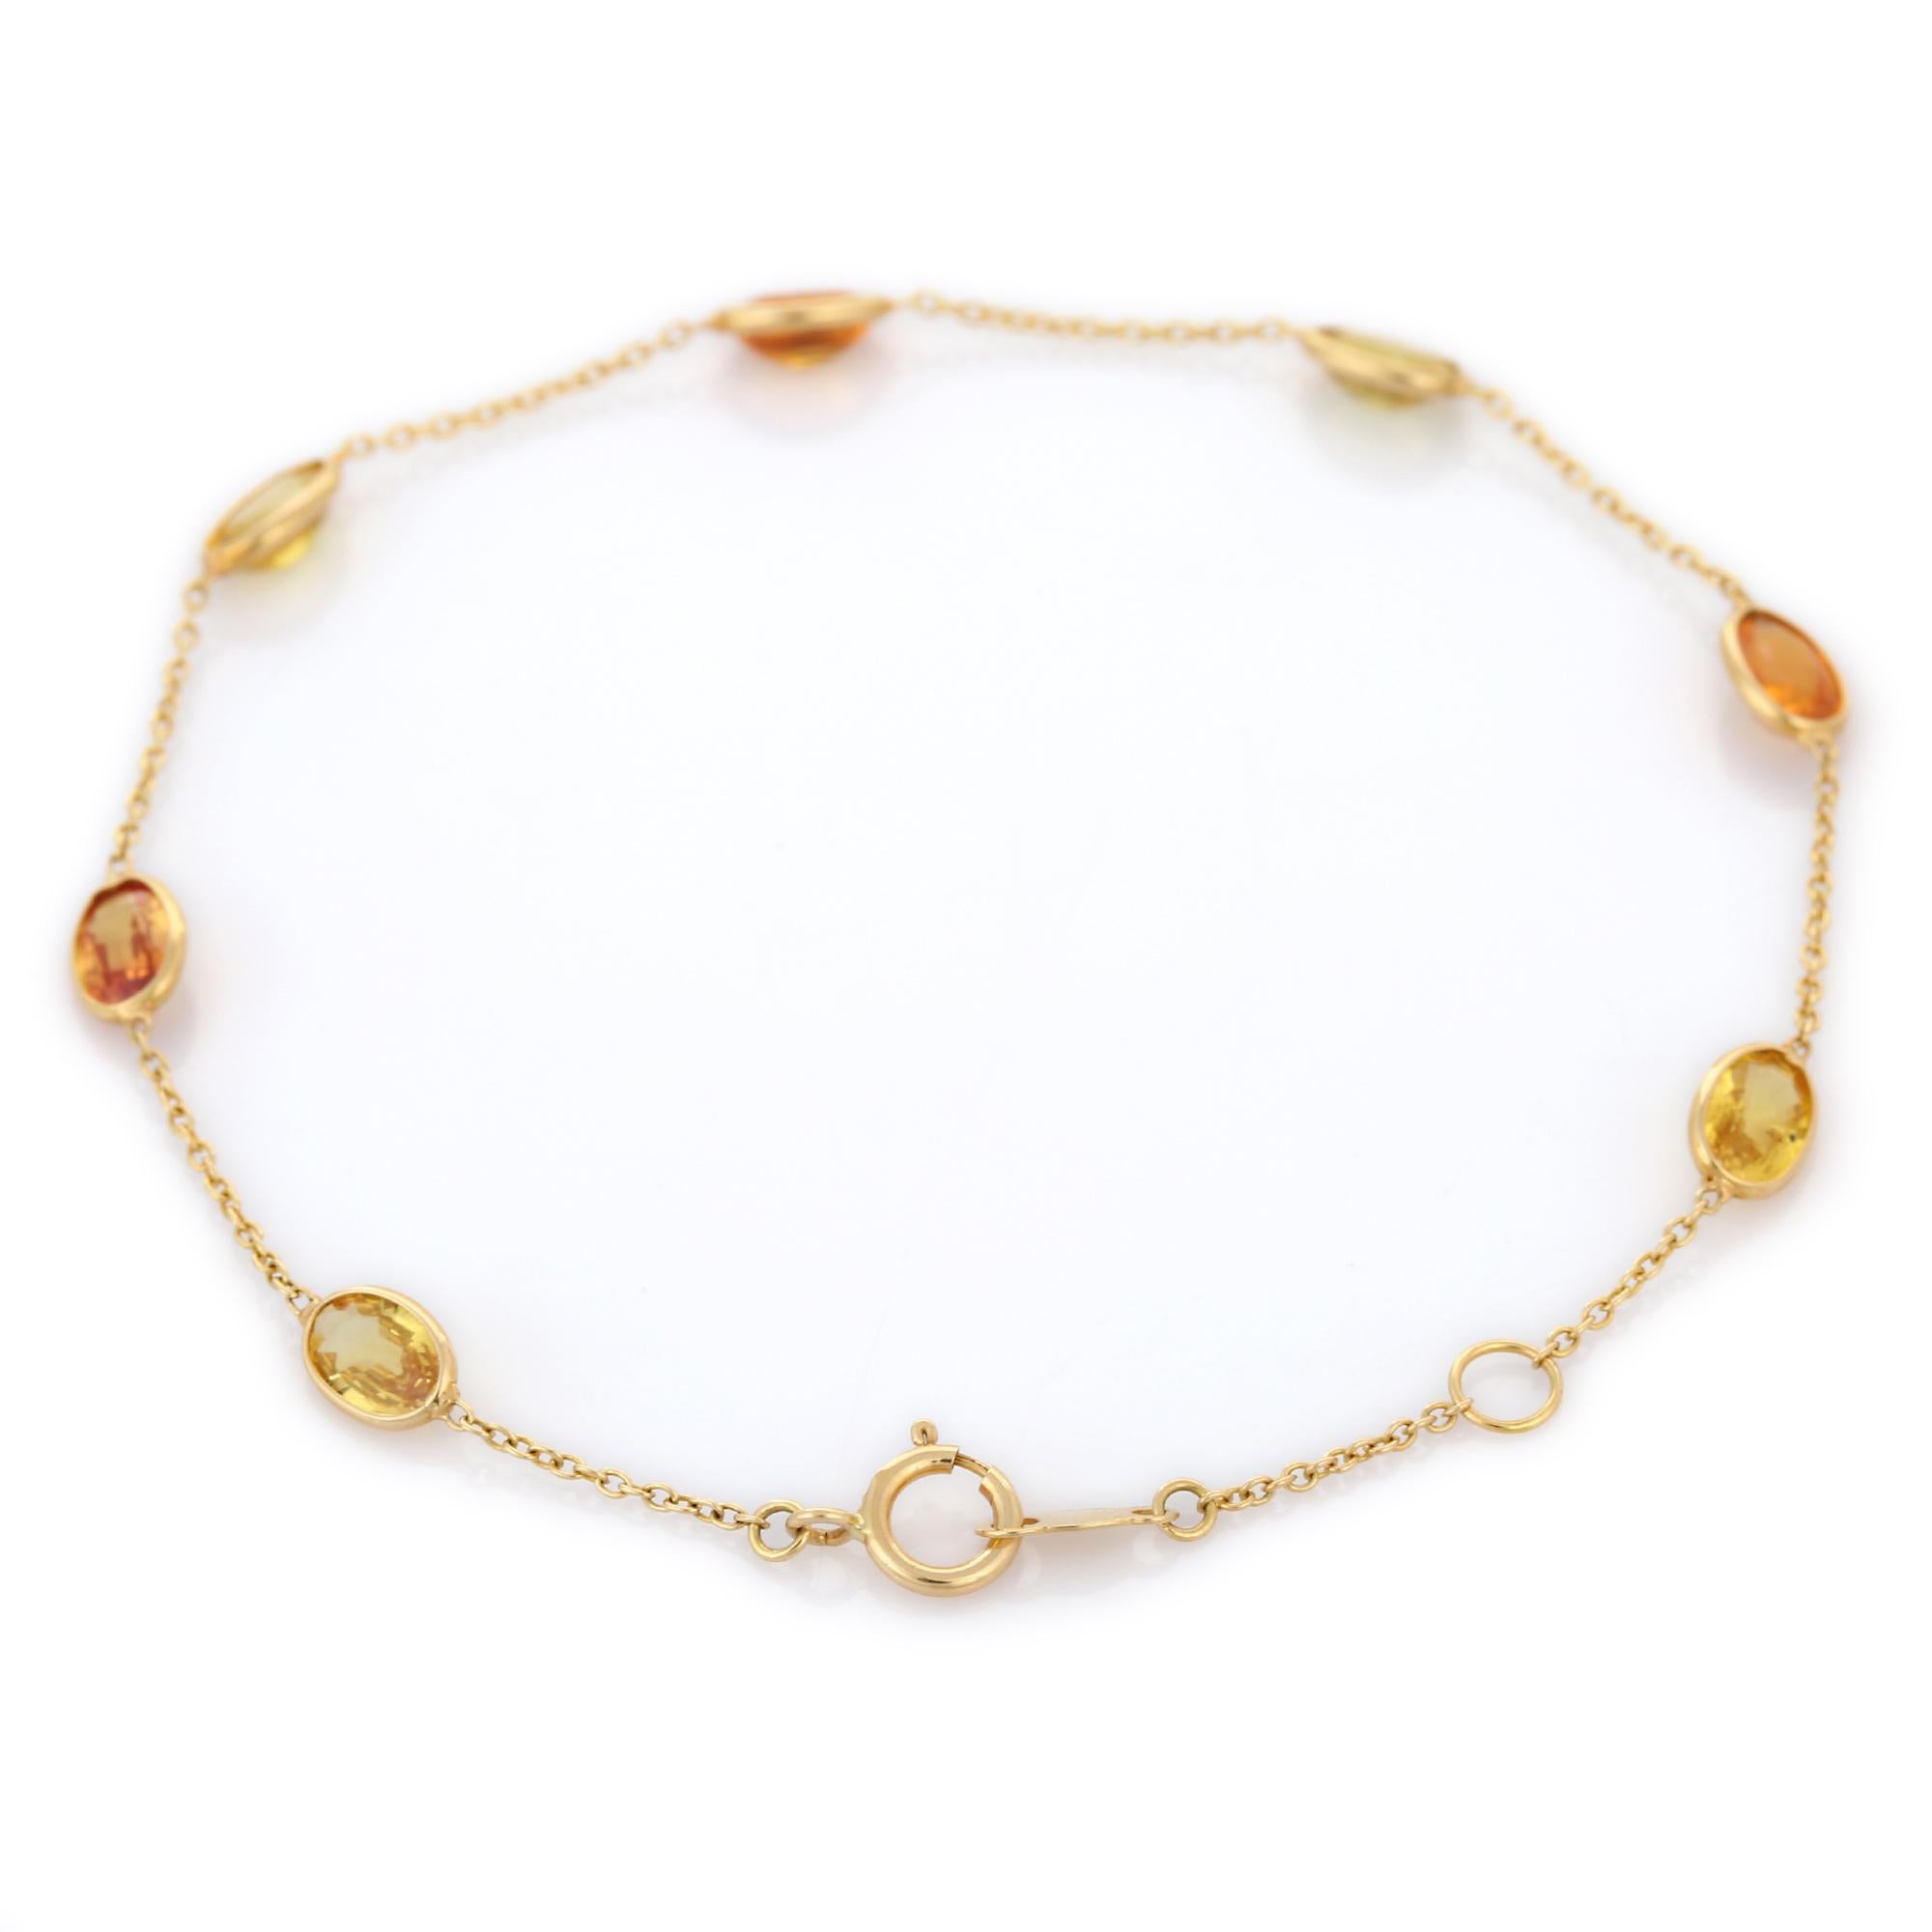 Contemporary Spectacular 3.8 ct Multi Sapphire Charm Bracelet Studded in 18K Yellow Gold For Sale